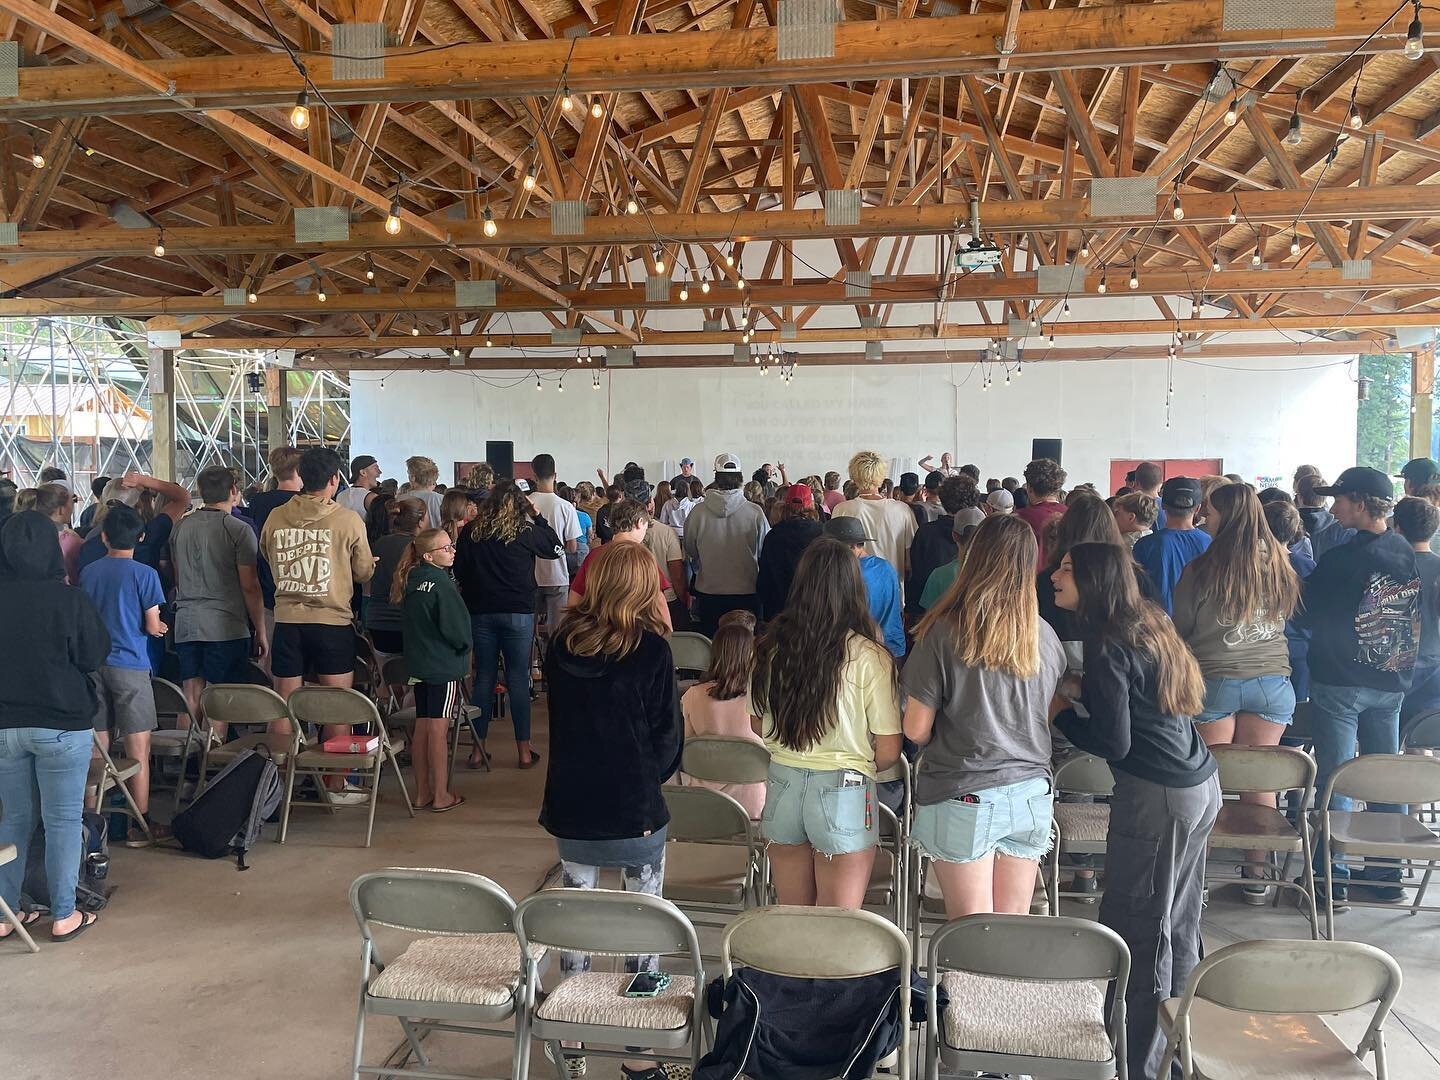 Teen camp has started!! Be in prayer for the working of the Holy Spirit this week.